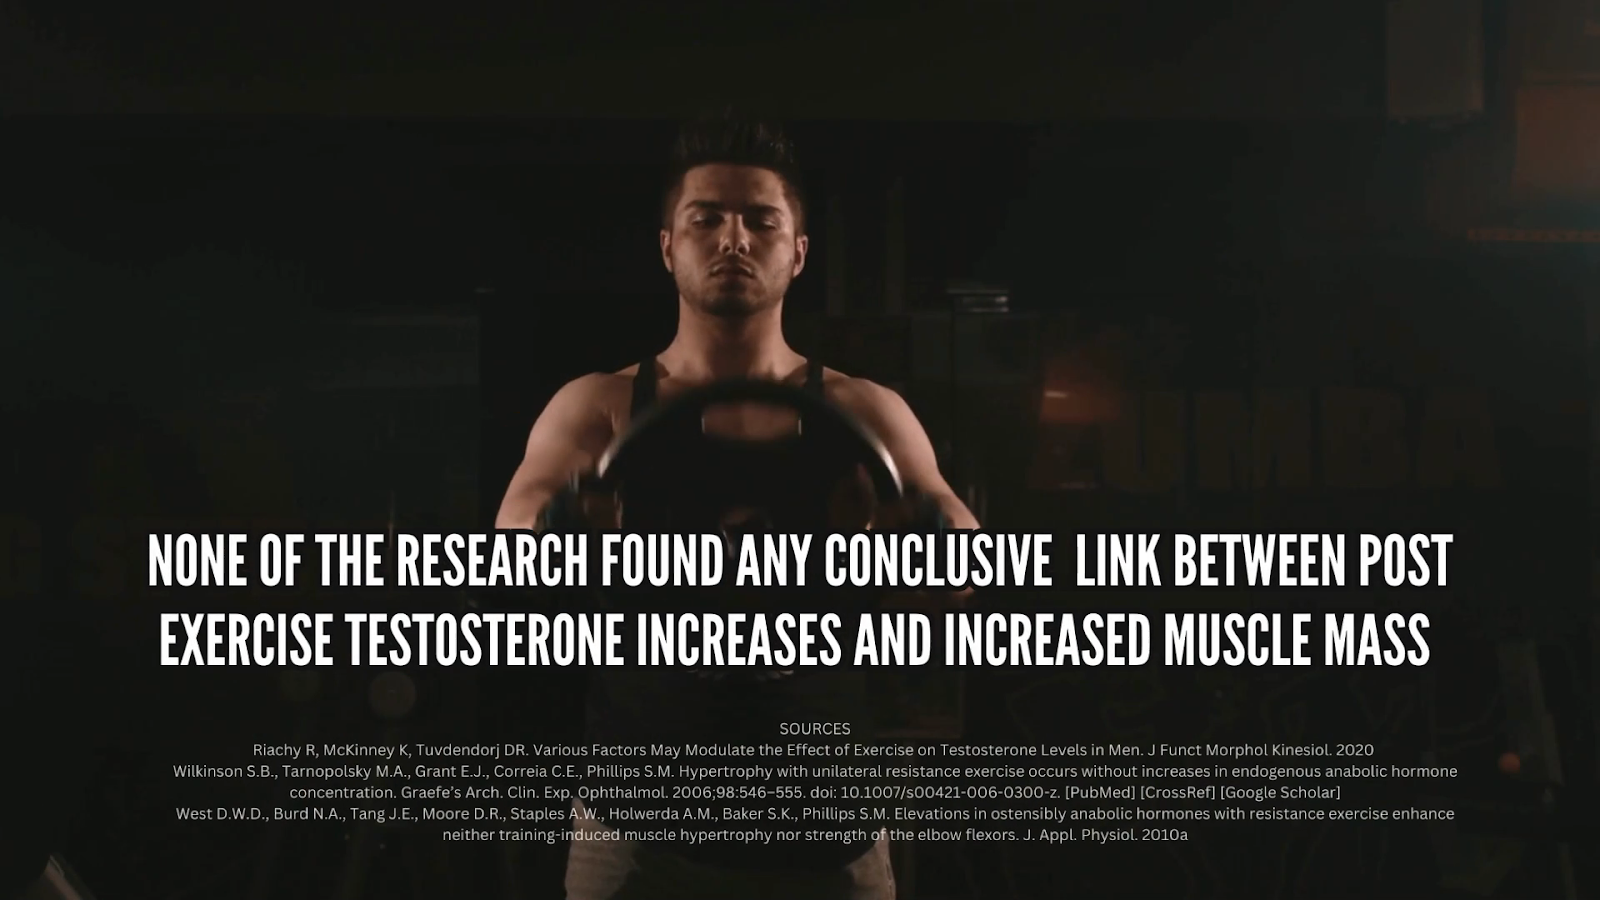 Research has found no conclusive link between post exercise testosterone increases and muscle mass increases